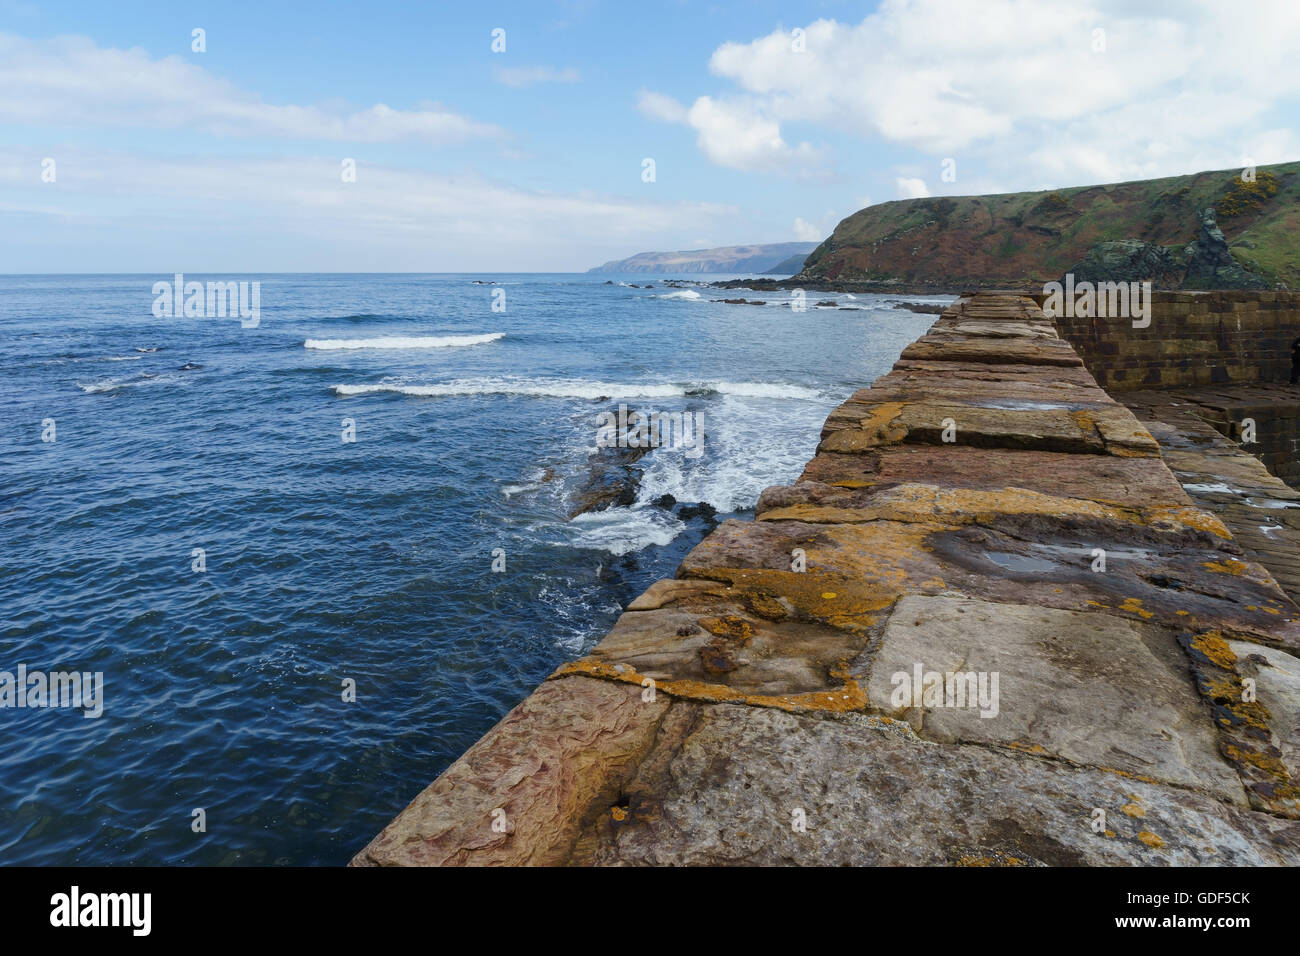 The stone breakwater at Cove Harbour, Scotland. Stock Photo